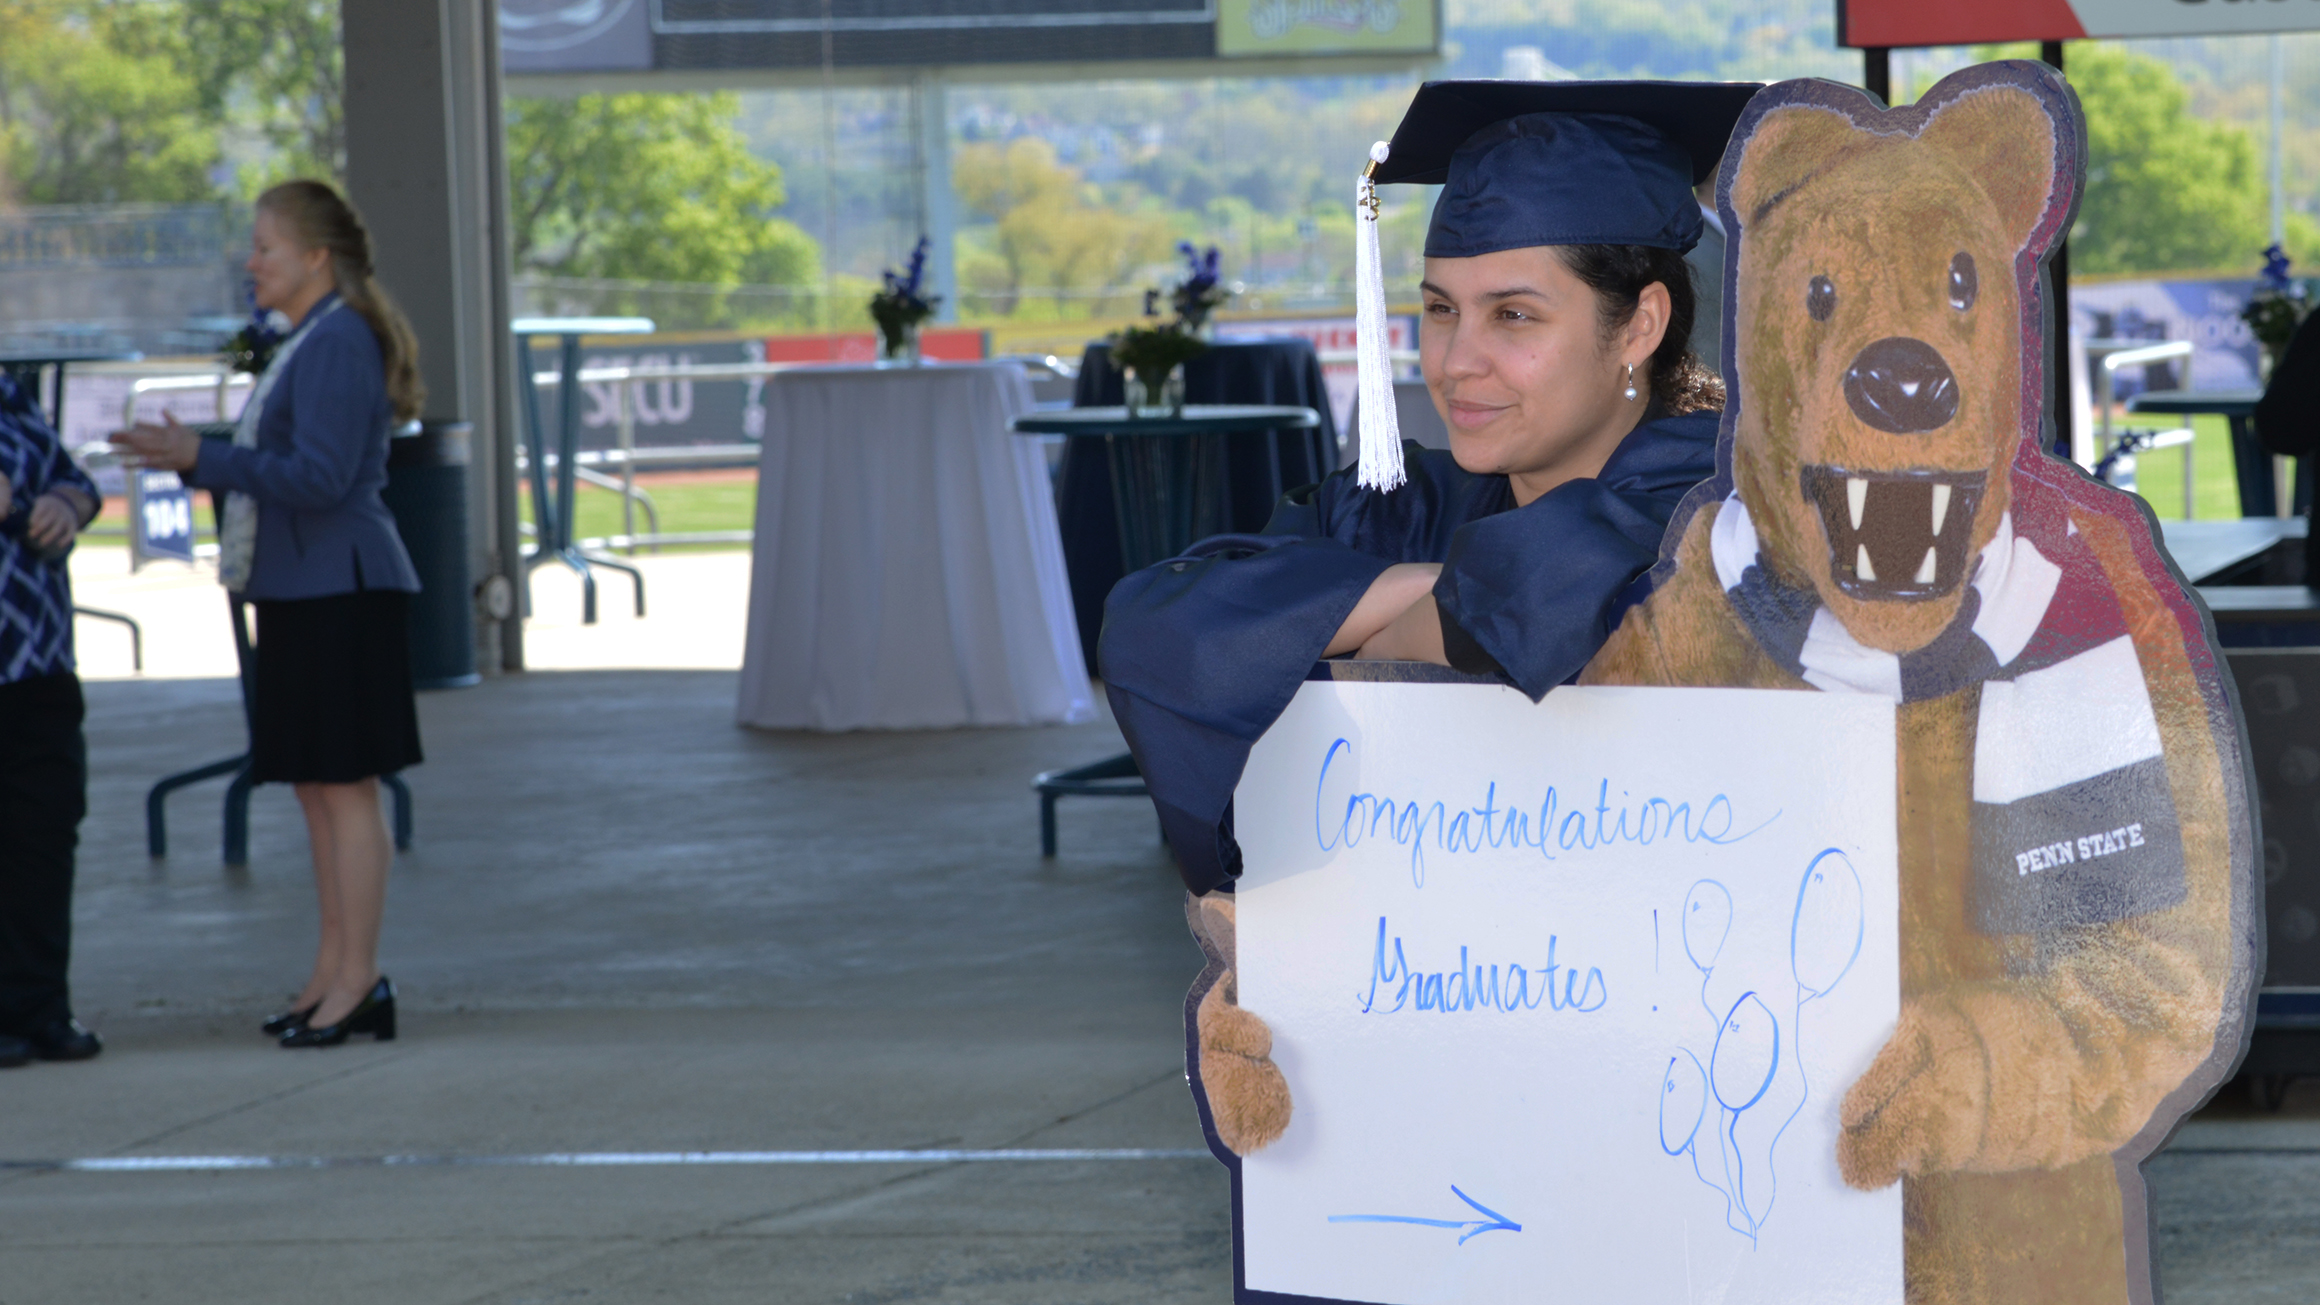 A woman stands in a blue cap and gown posing with a Nittany Lion cutout.